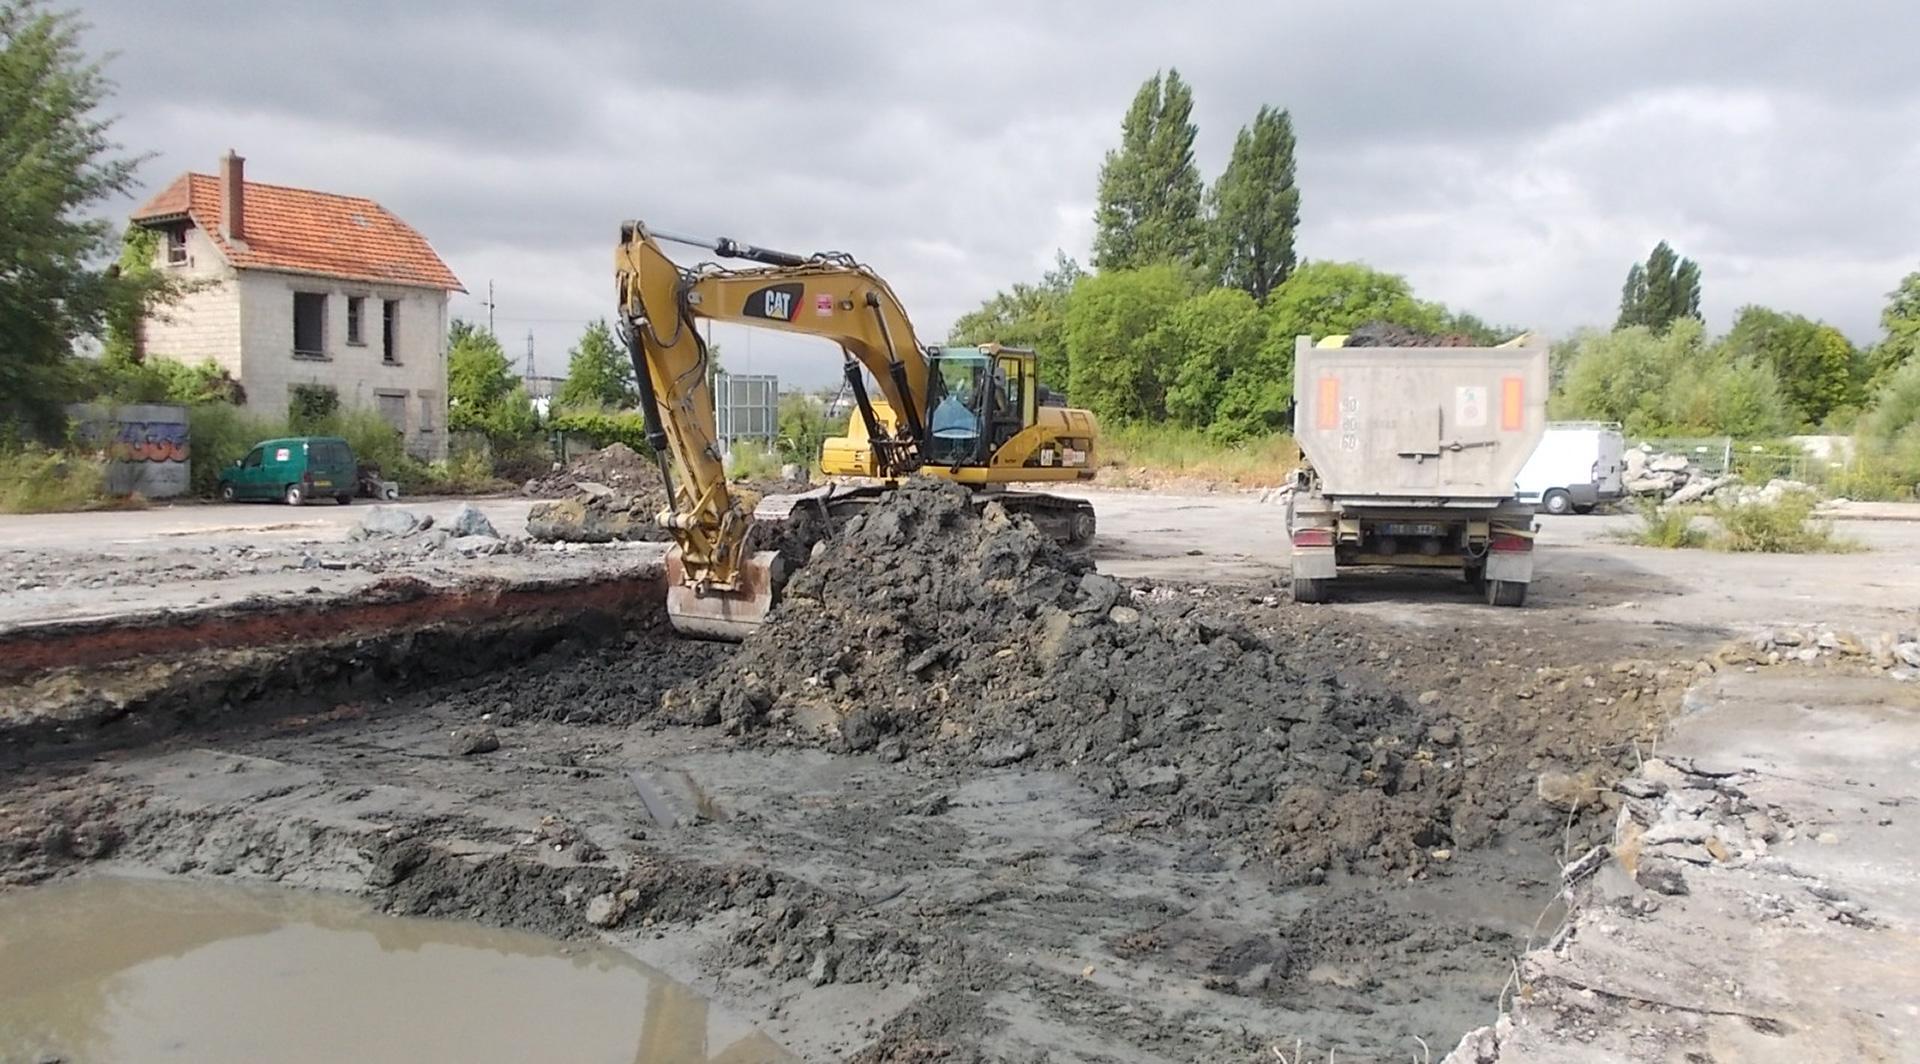 Rehabilitation work on a brownfield site